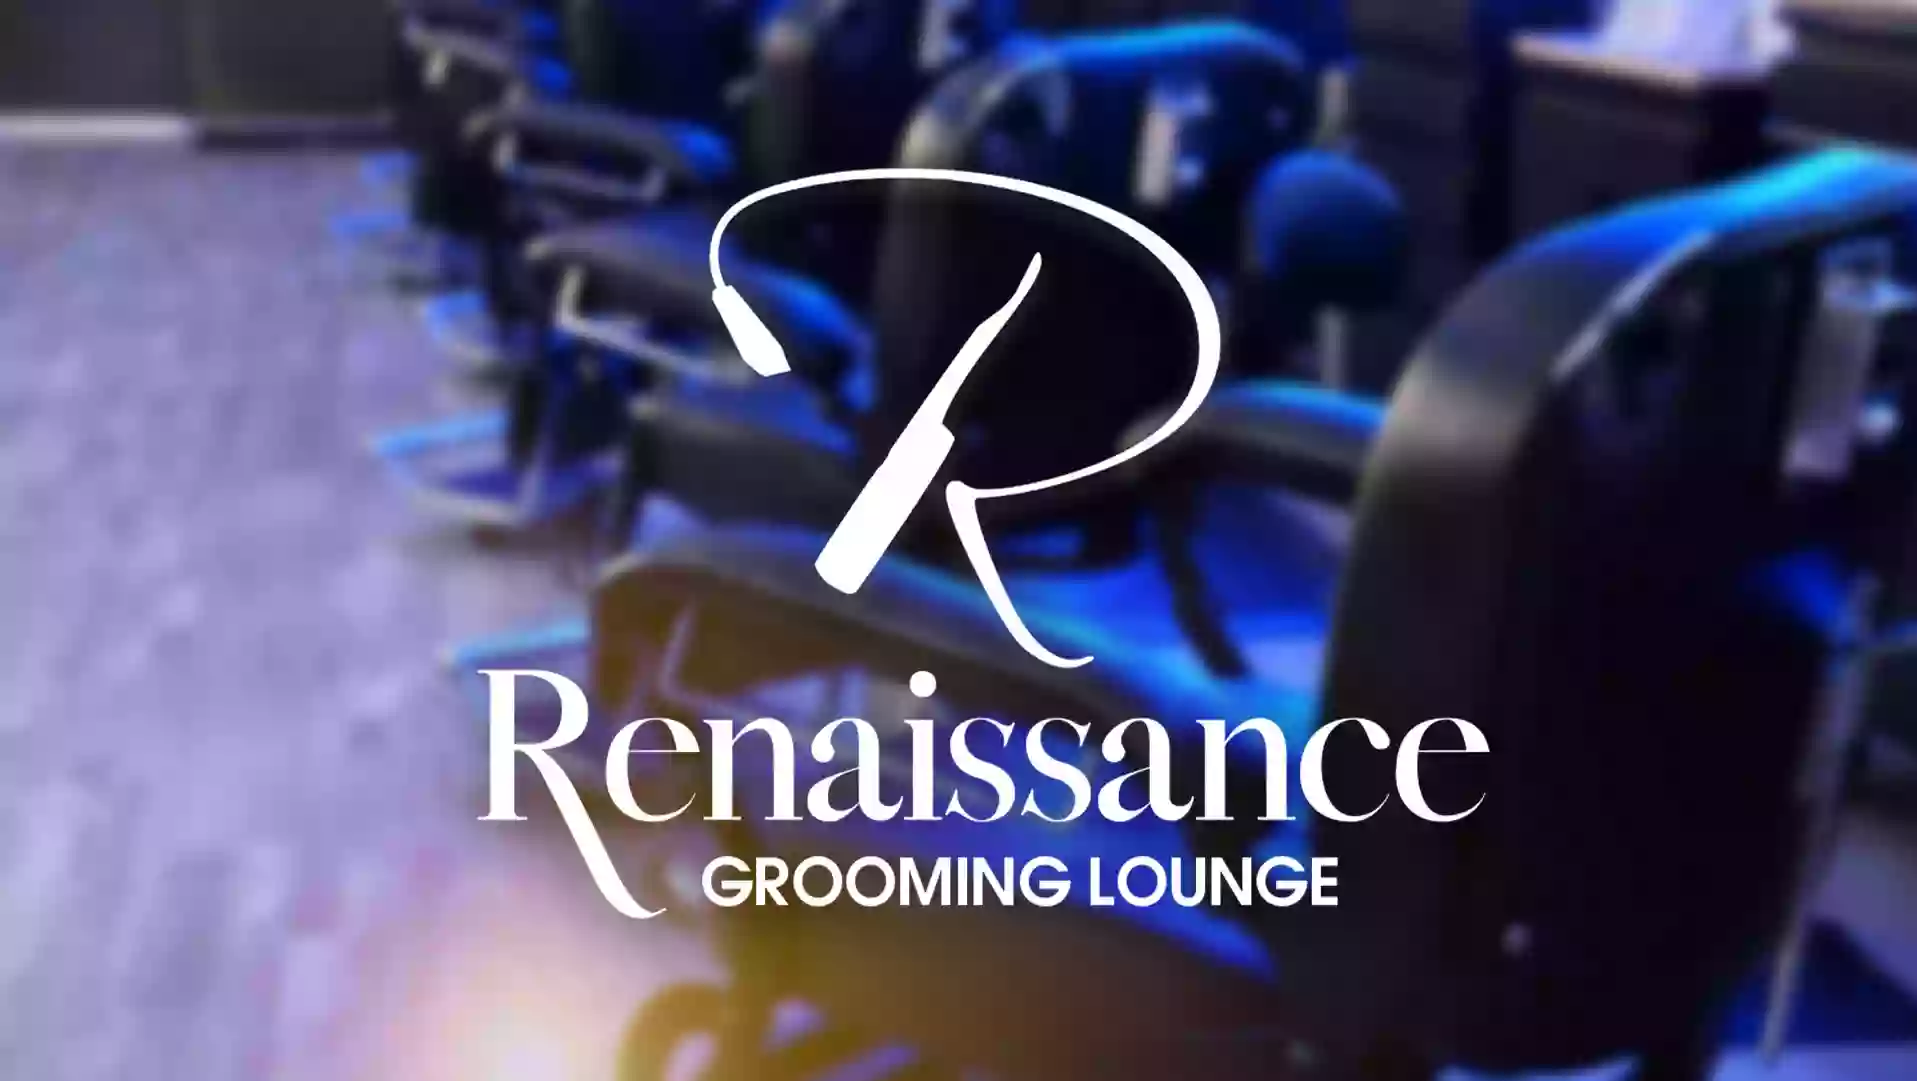 The Renaissance Grooming Lounge